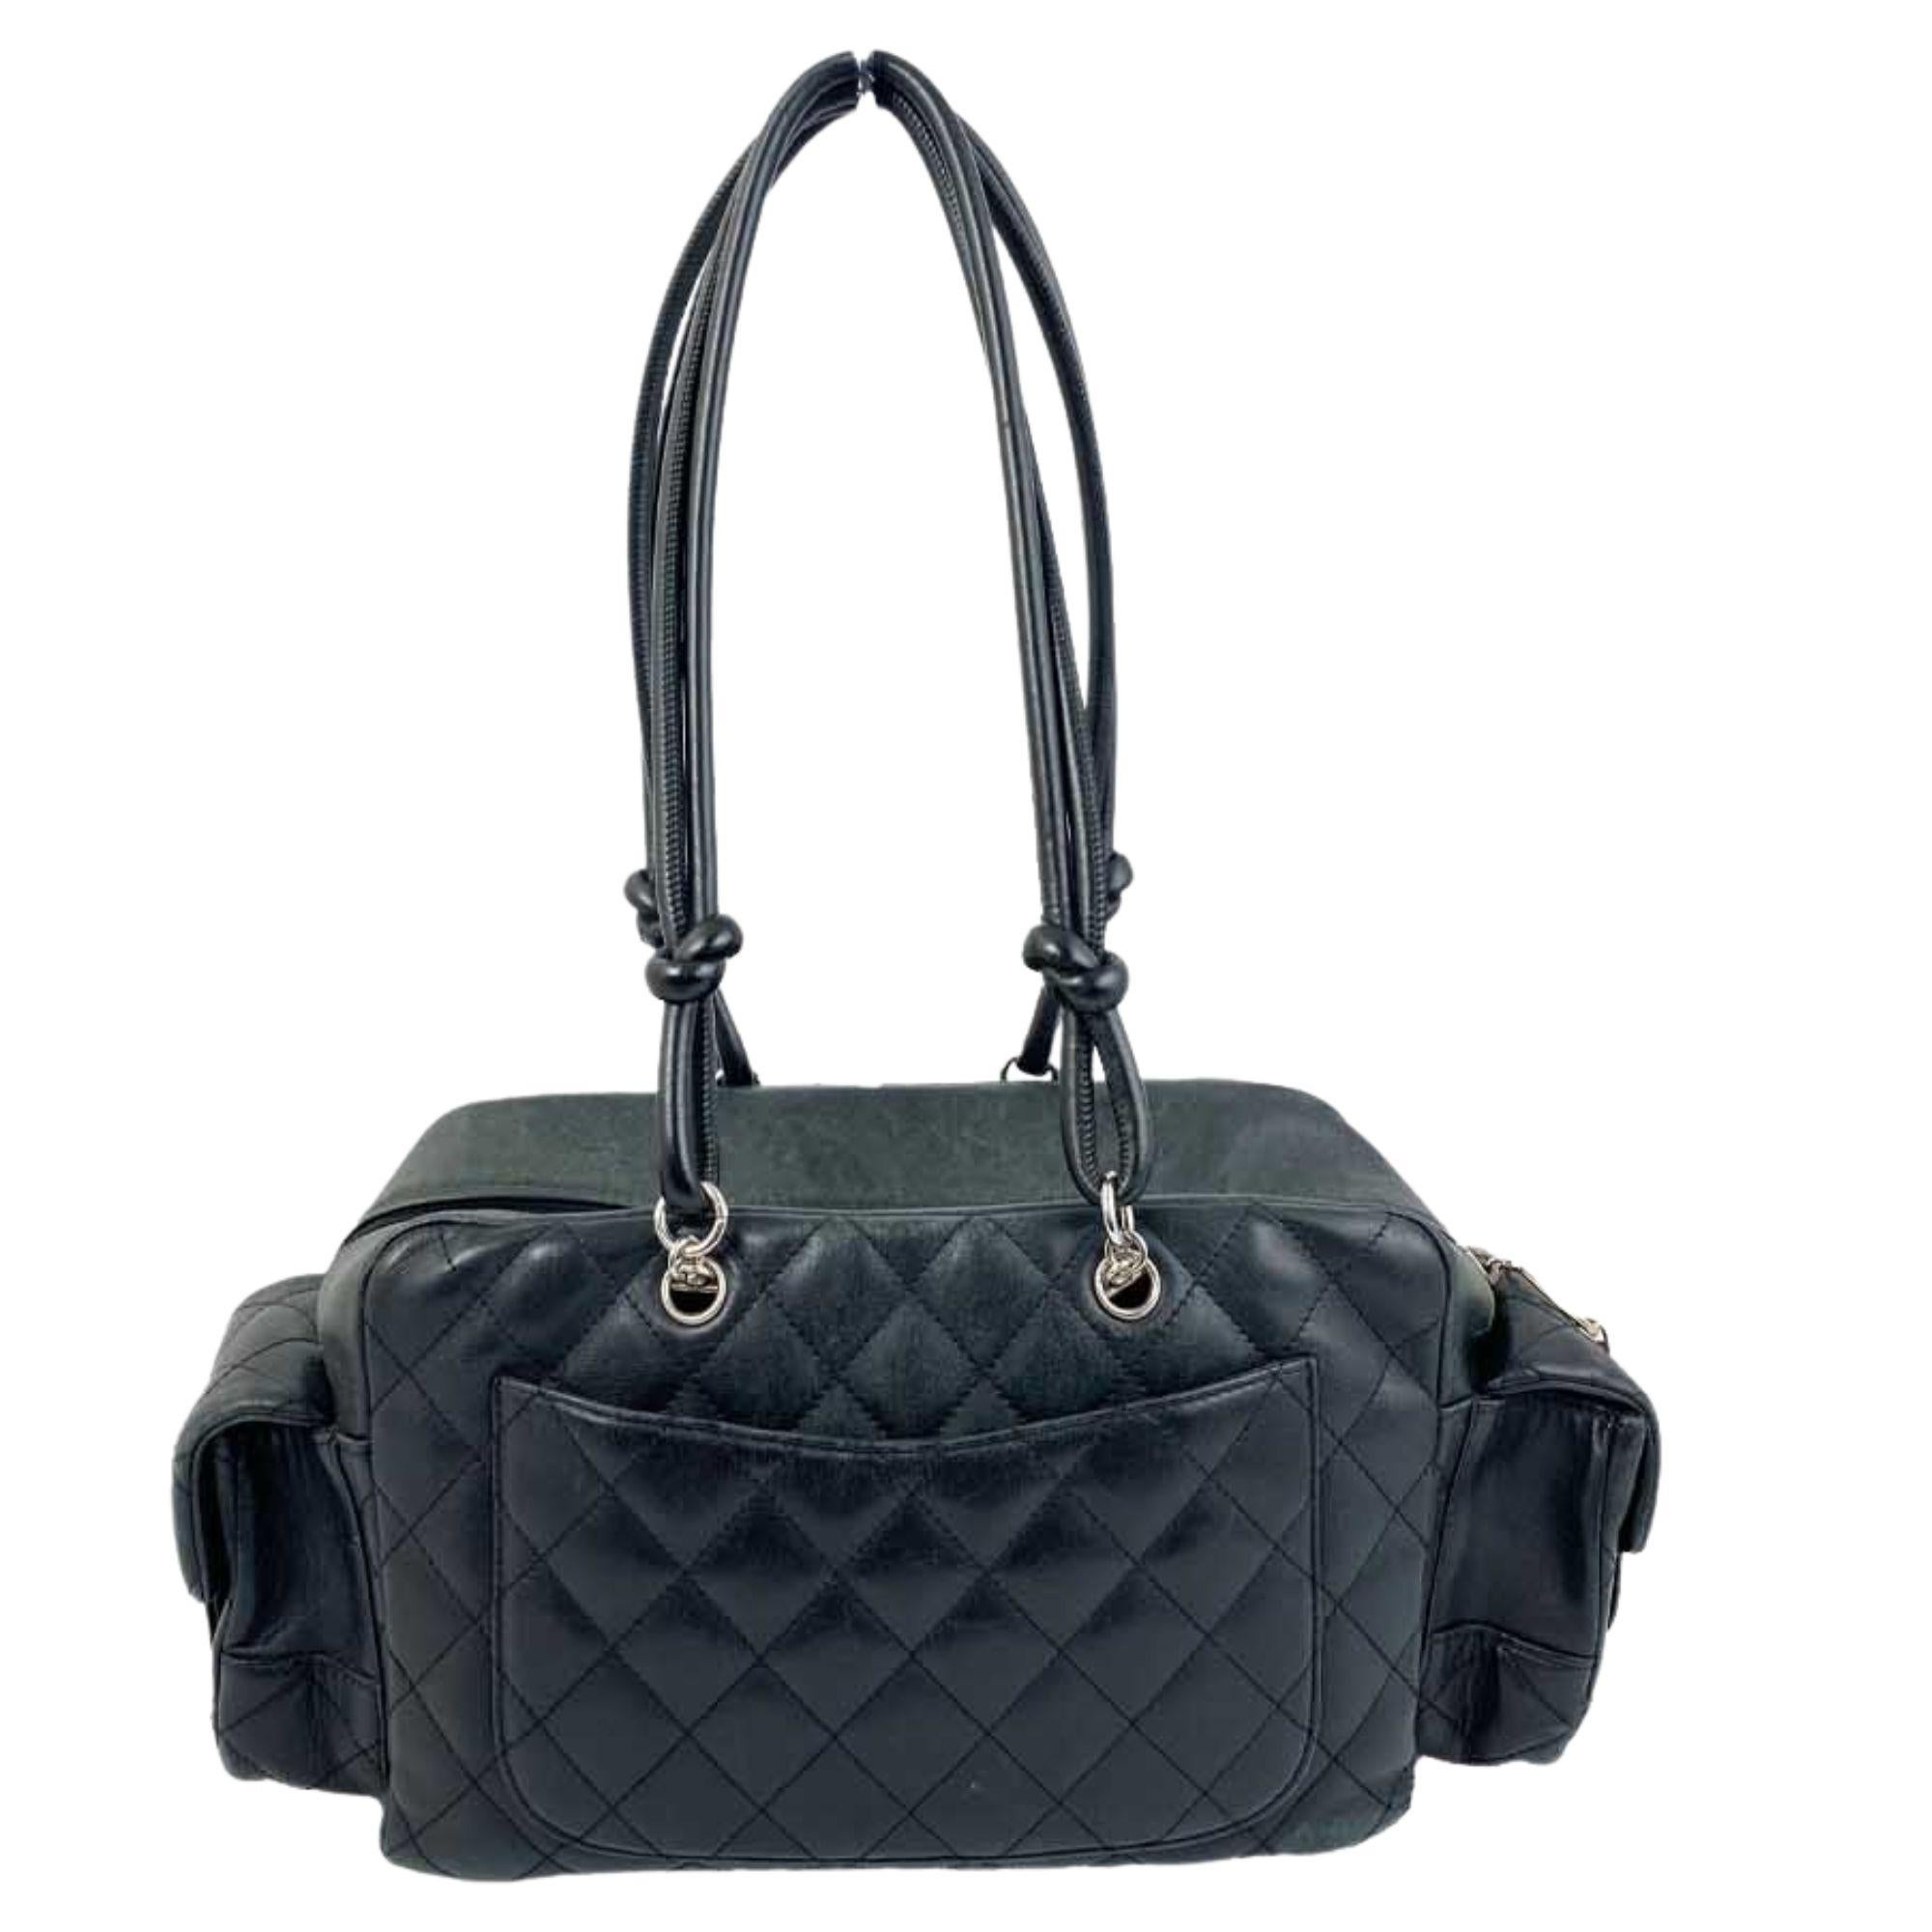 Black Chanel quilted leather hand bag. silver-tone hardware, two pockets in the front, two on either side, and one slide pocket in the back. One zipper pocket and two slide pockets on the inside. Includes original dust bag. Serial Code